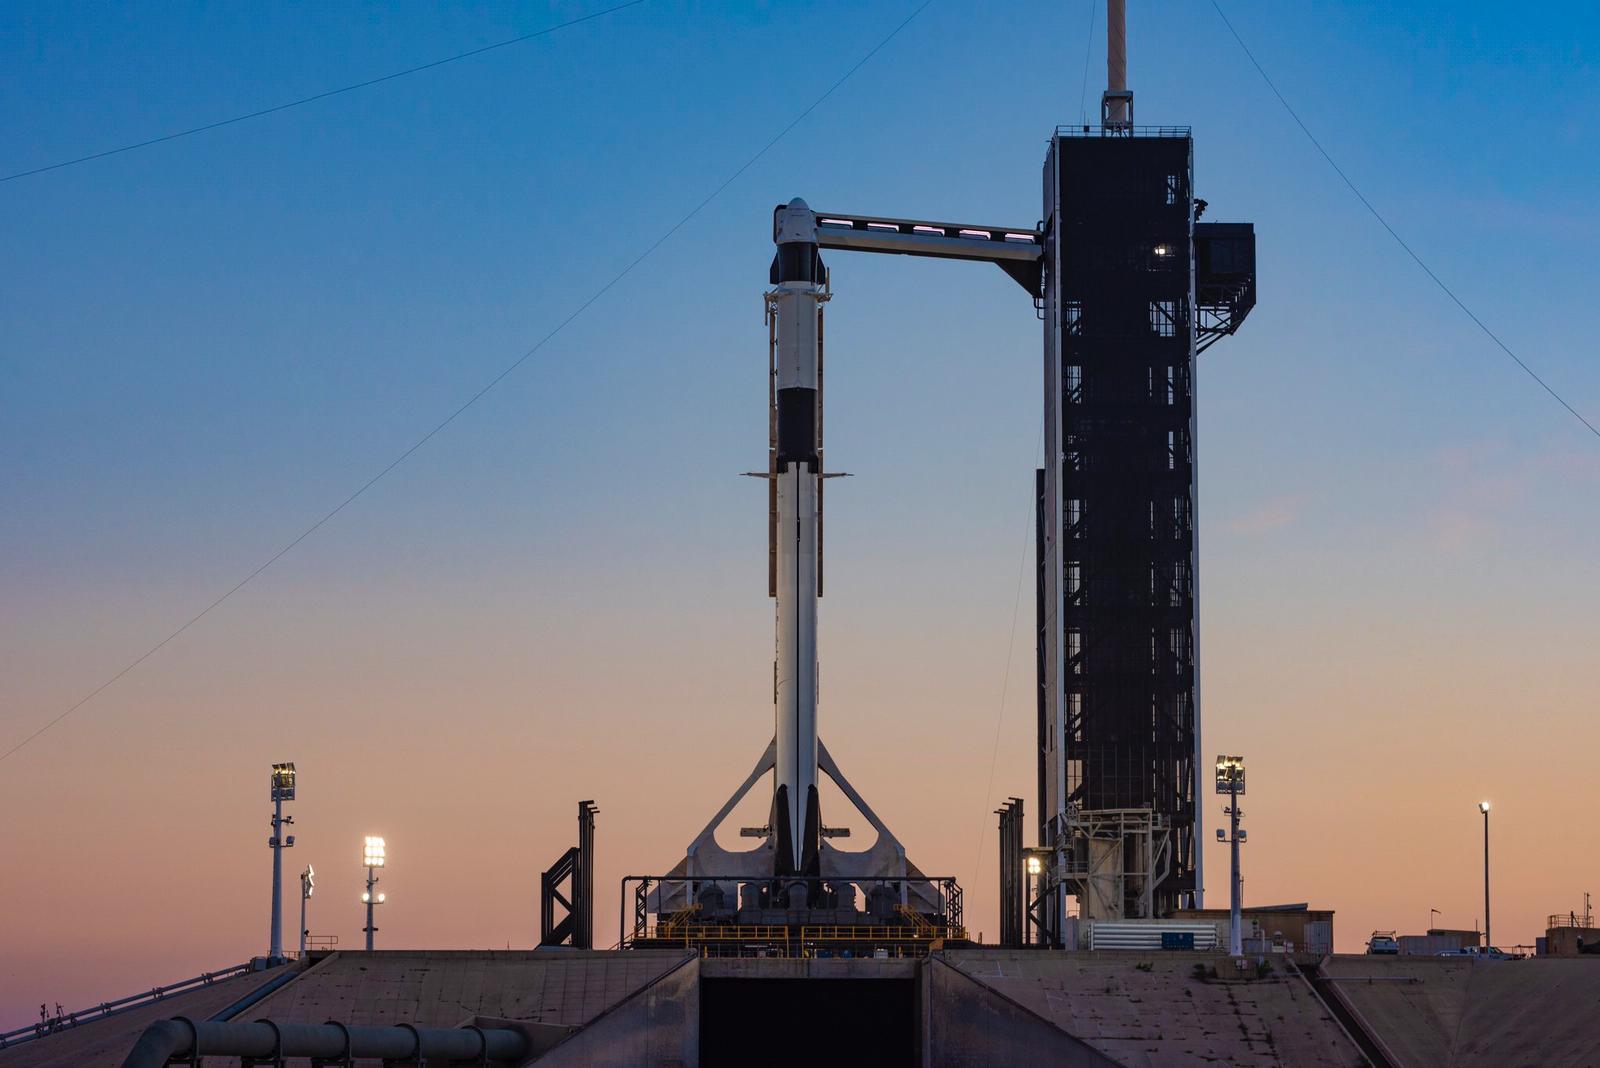 US-SpaceX man mission looking 'increasingly difficult' in 2019, exec says